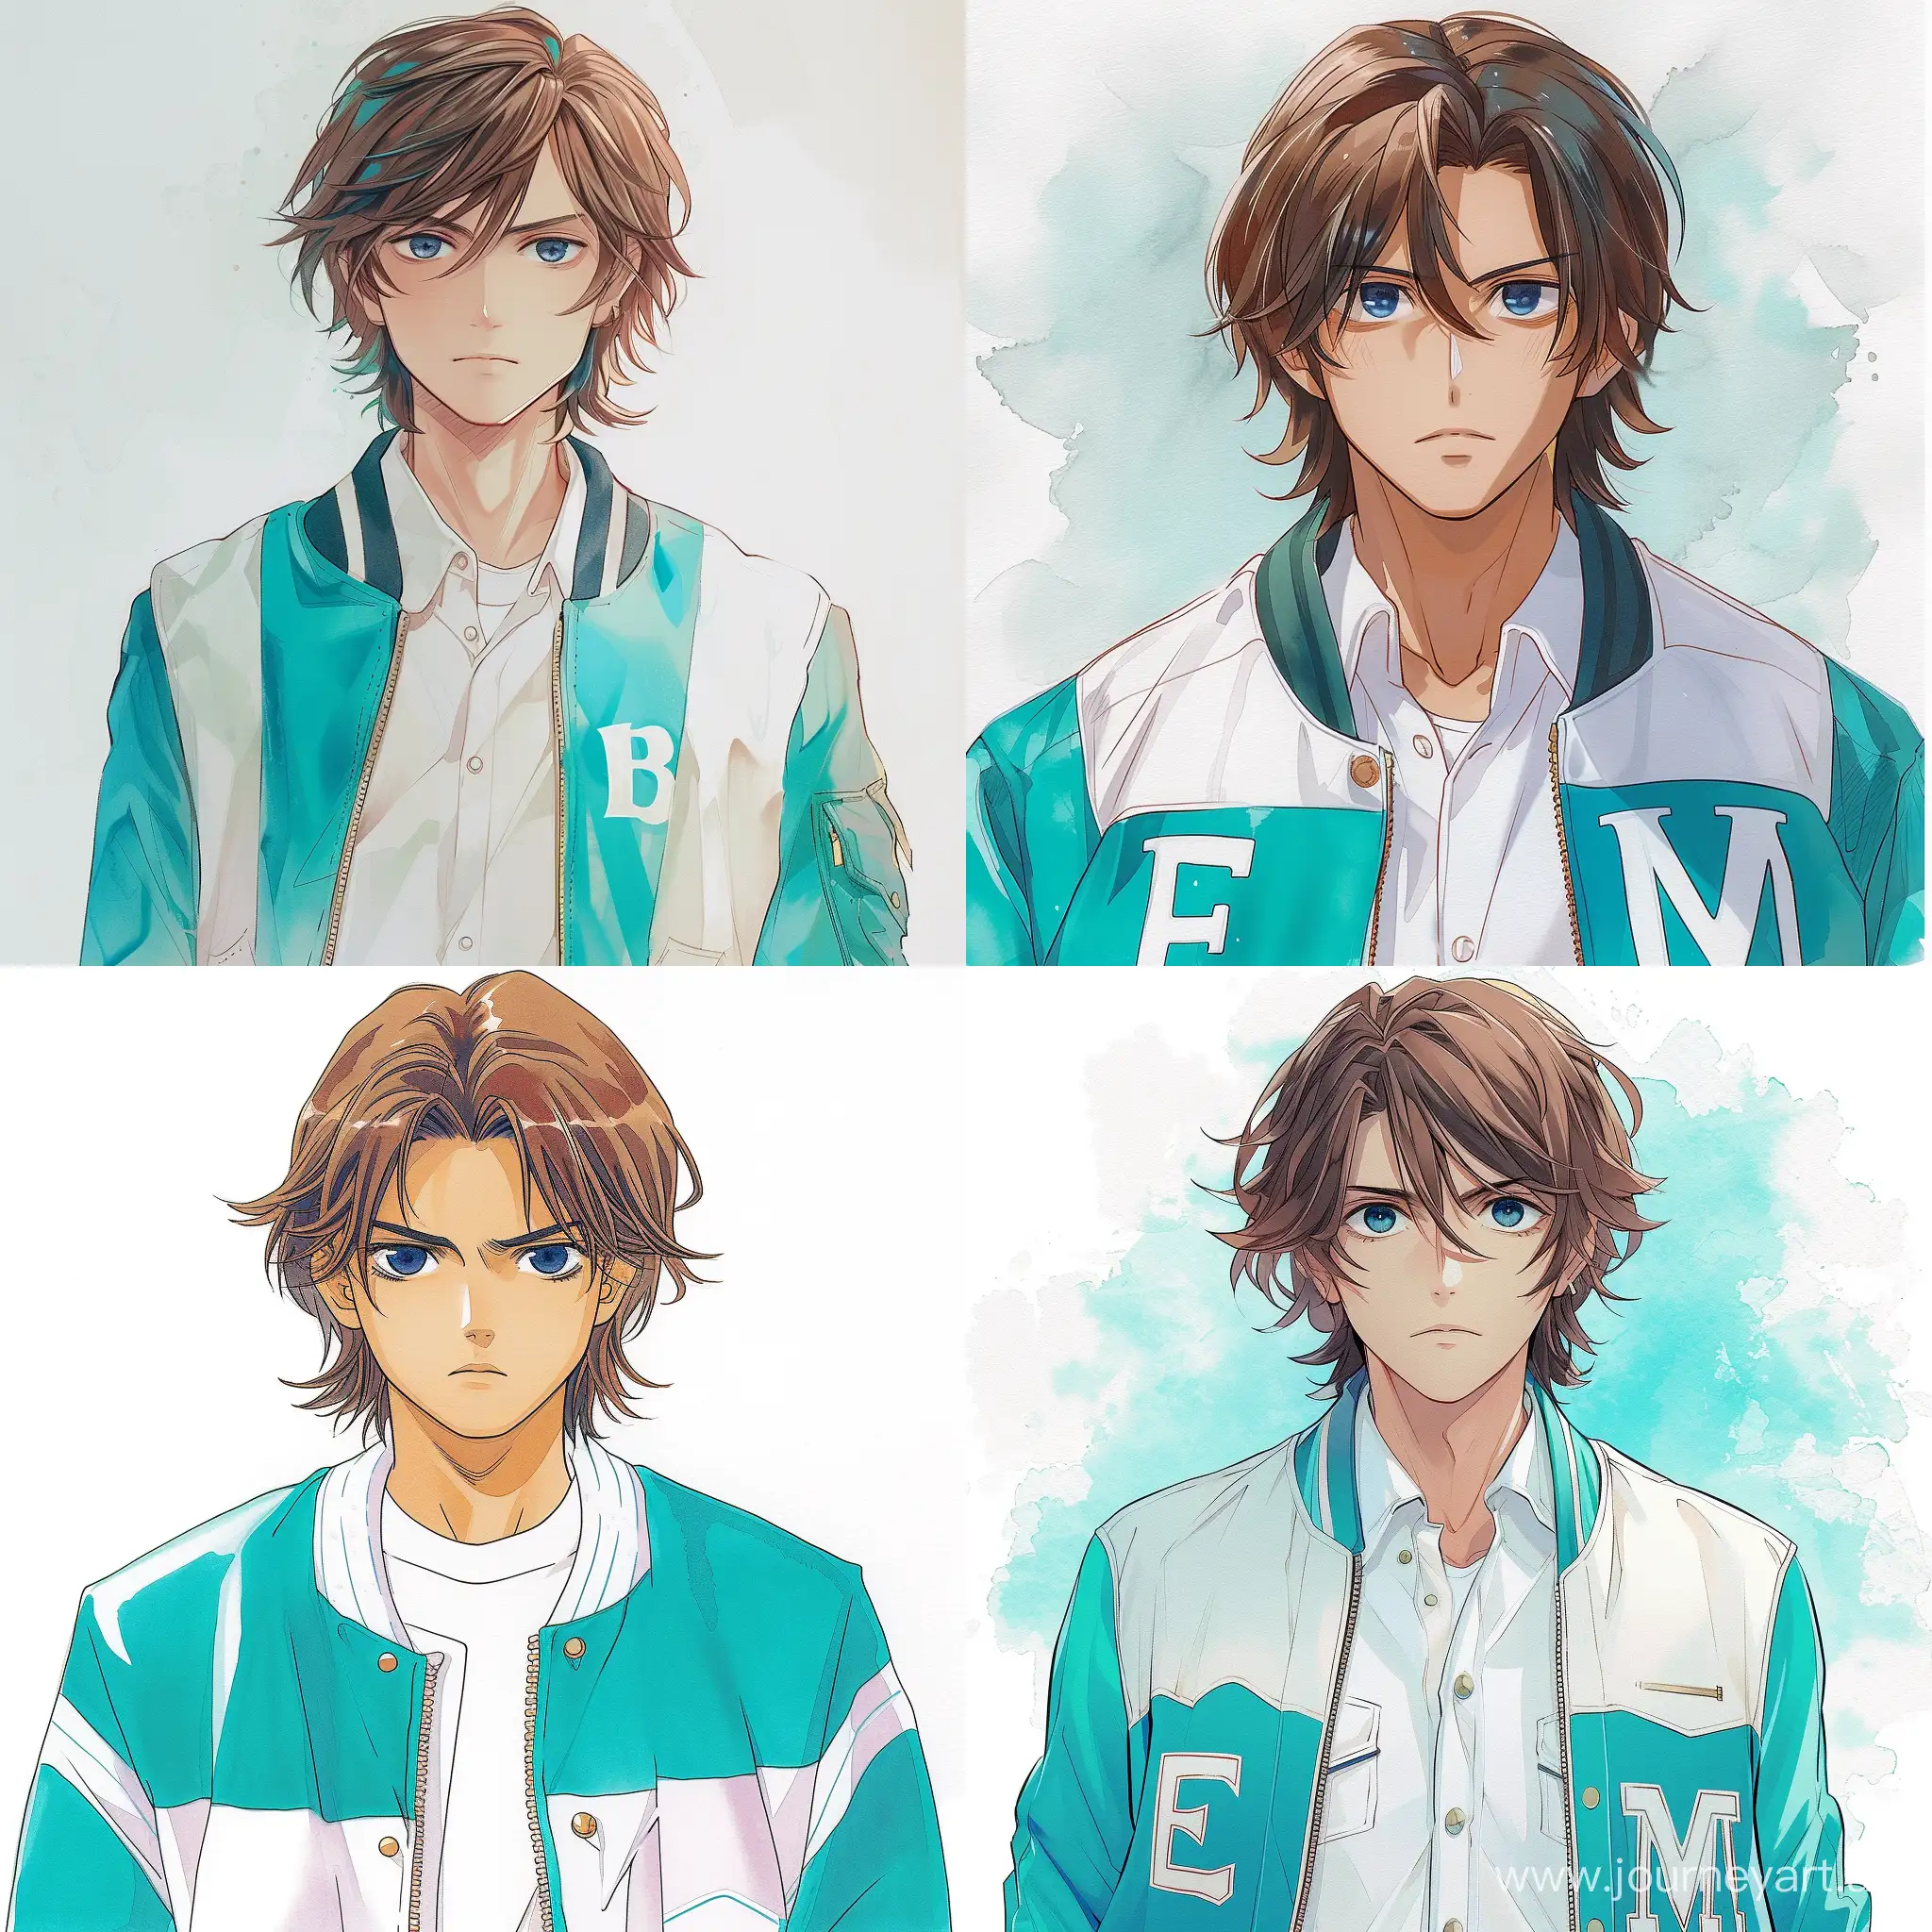 An anime face portrait of a light skinned teenage male with slightly long brown hair and navy blue eyes in a white shirt under a turquoise and white letterman jacket, anime, watercolor